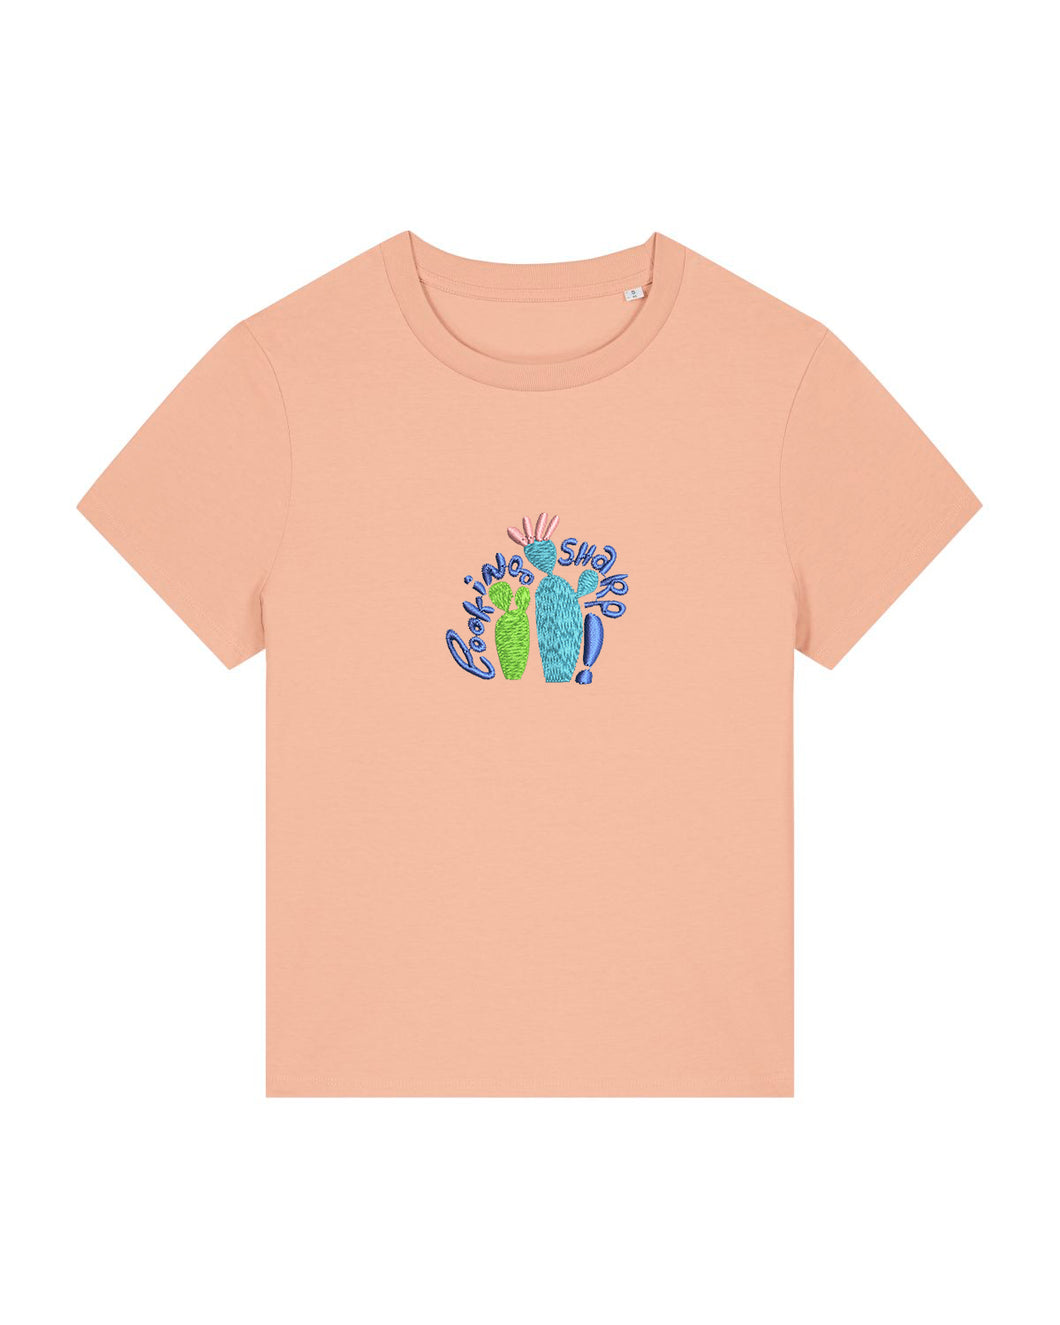 Looking sharp! 🌵- Embroidered WOMEN'S T-SHIRT